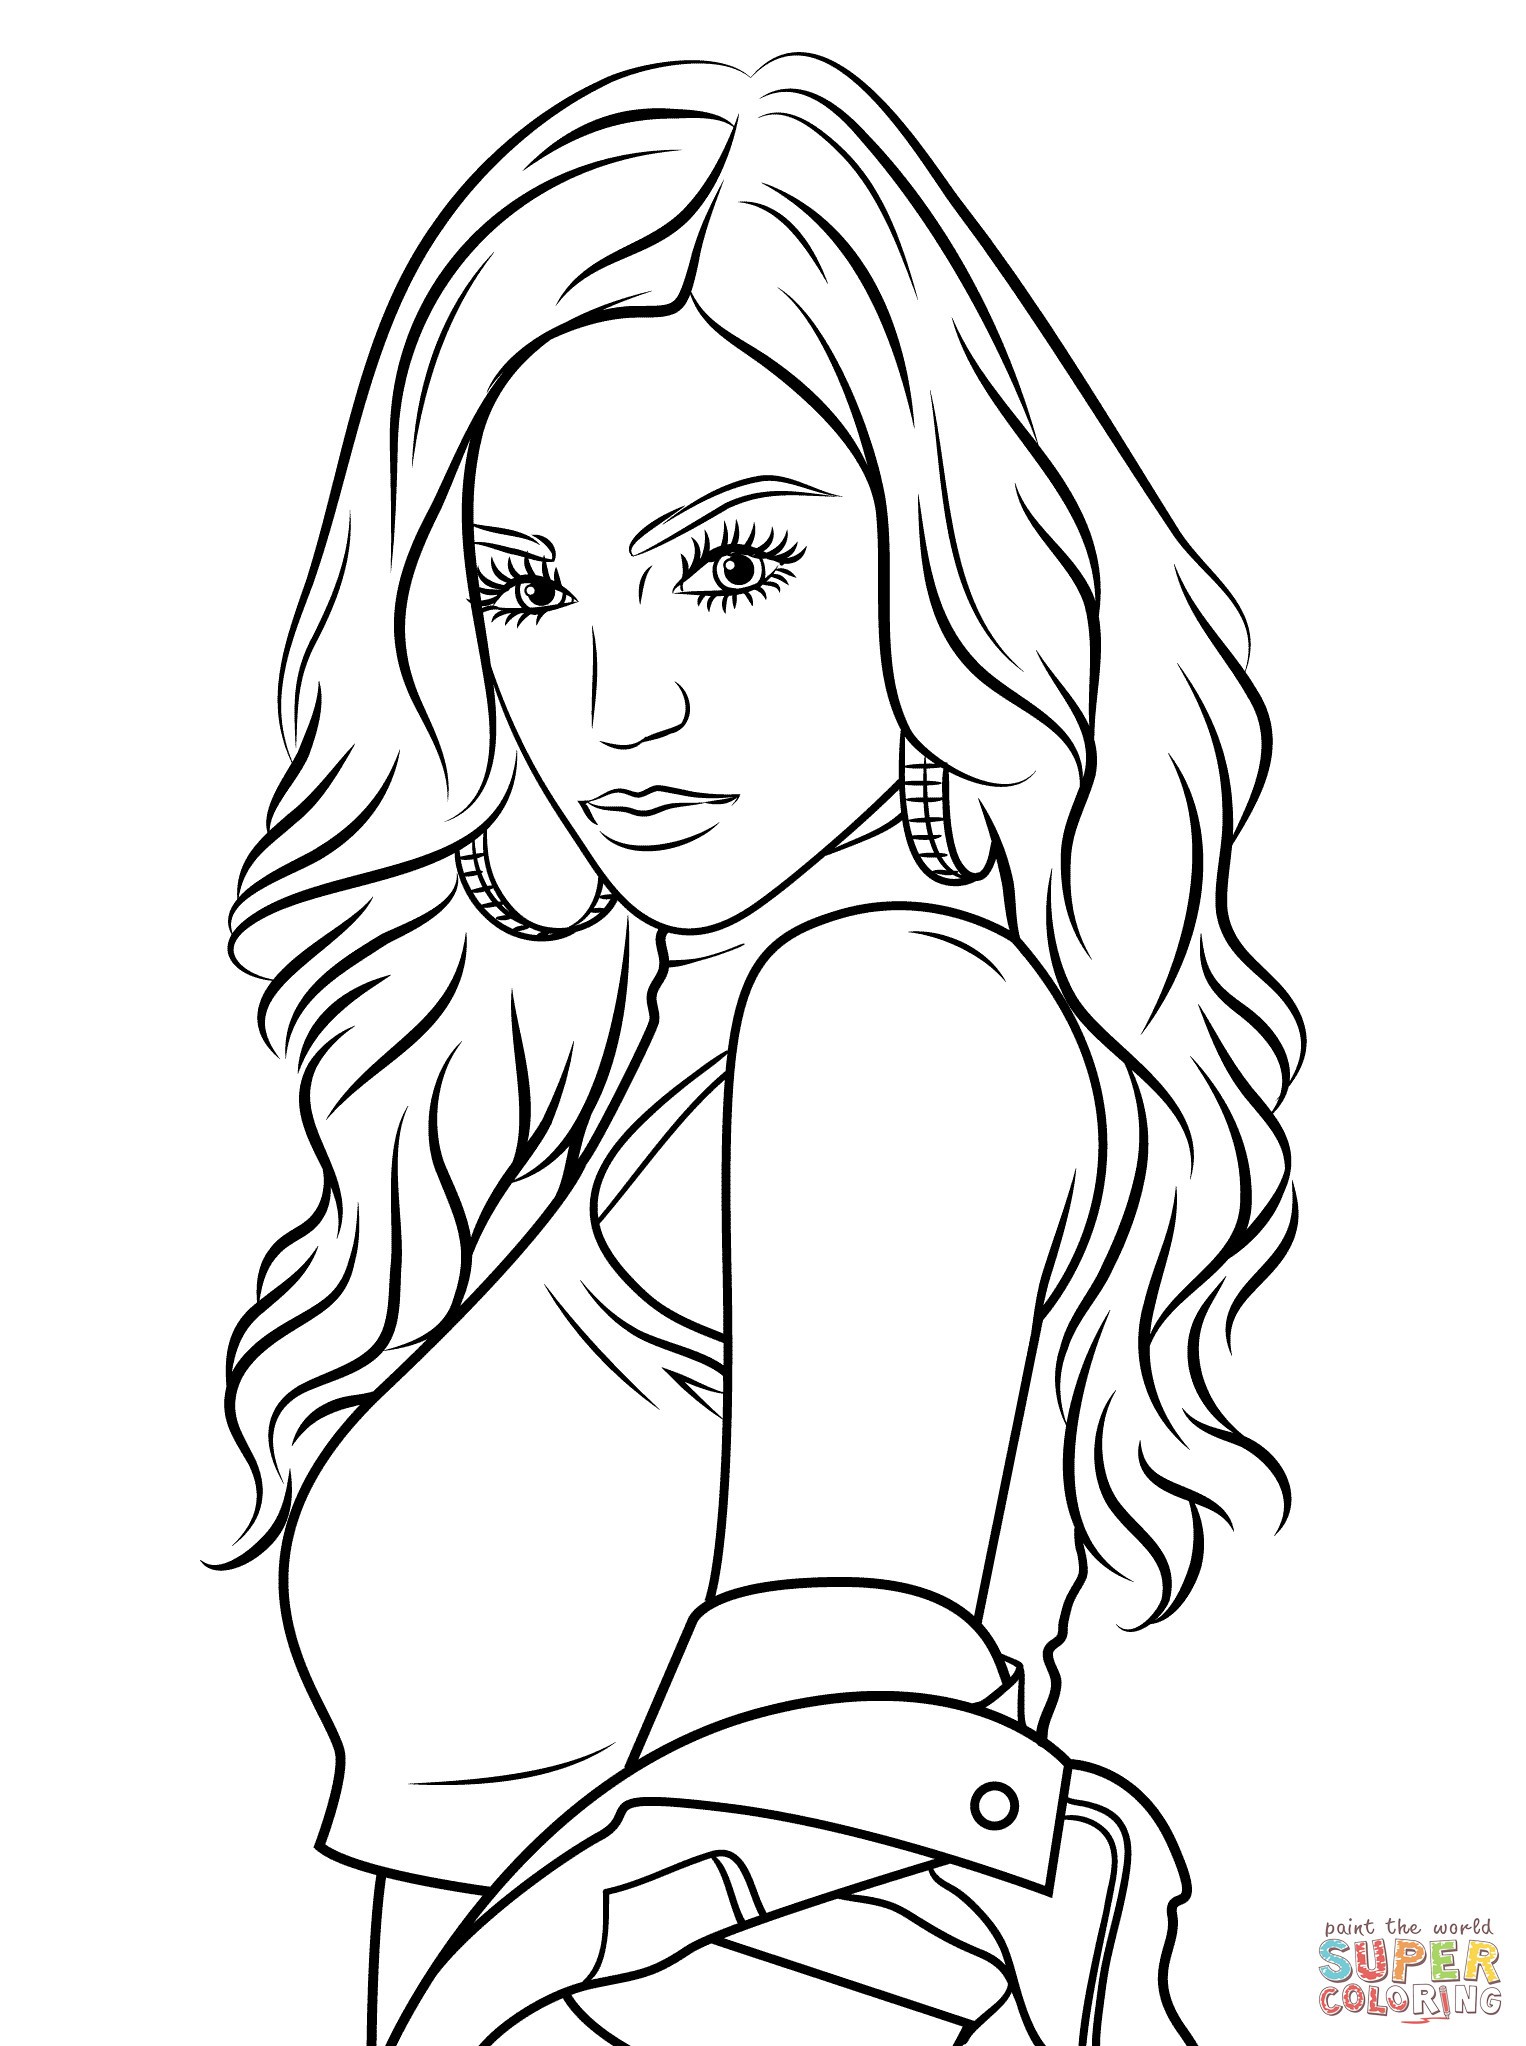 coloring : Pretty Girl Coloring Pages Luxury The Best Ideas For Realistic Girl  Coloring Pages Best Pretty Girl Coloring Pages ~ queens